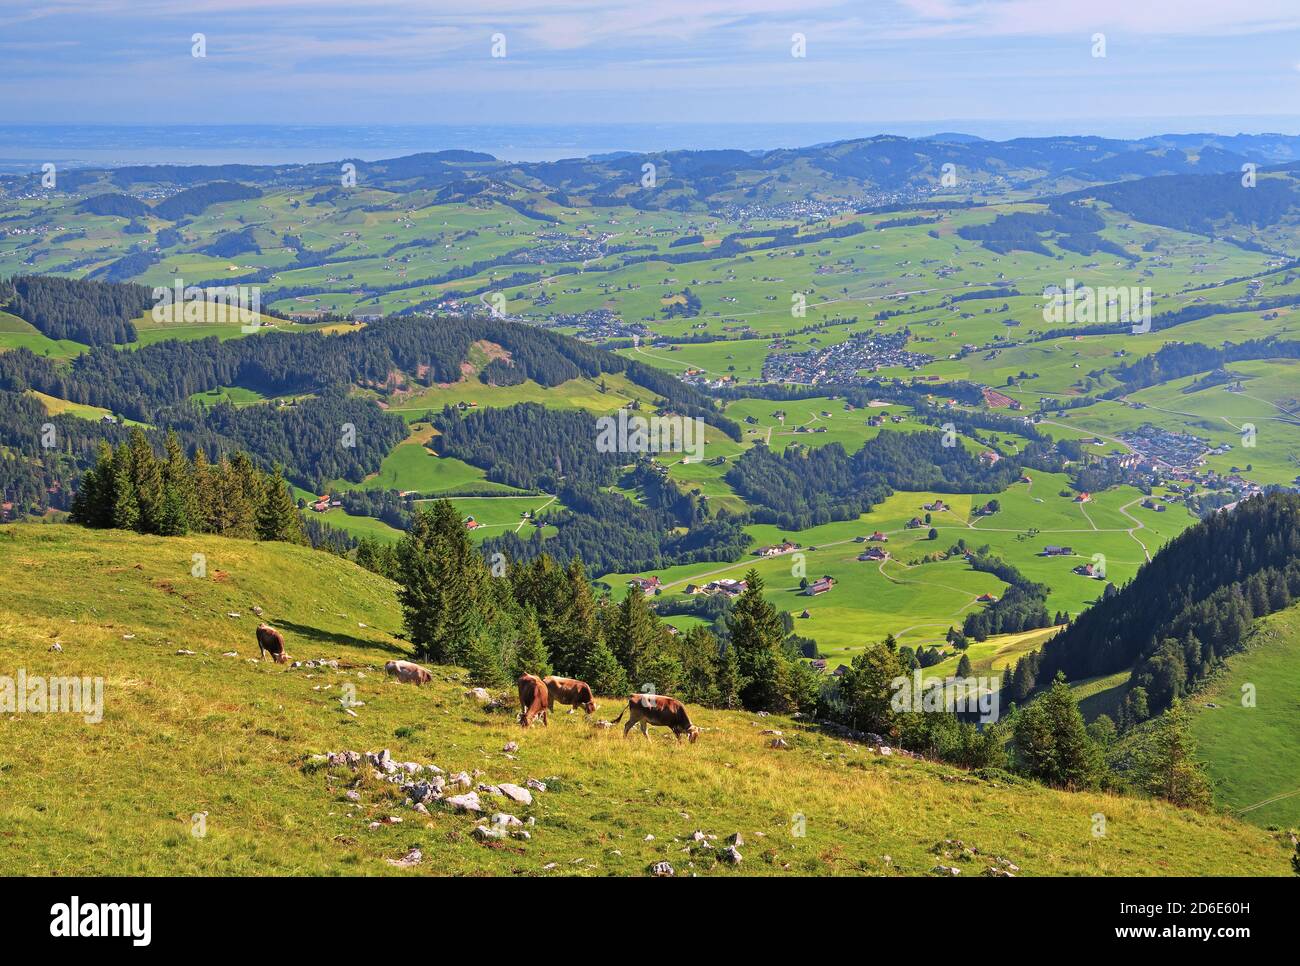 Mountain meadow with cows on the Ebenalp with a view of the Appenzeller Land to Lake Constance, Wasserauen, Alpsteingebirge, Appenzell Alps, Canton of Appenzell-Innerrhoden, Switzerland Stock Photo